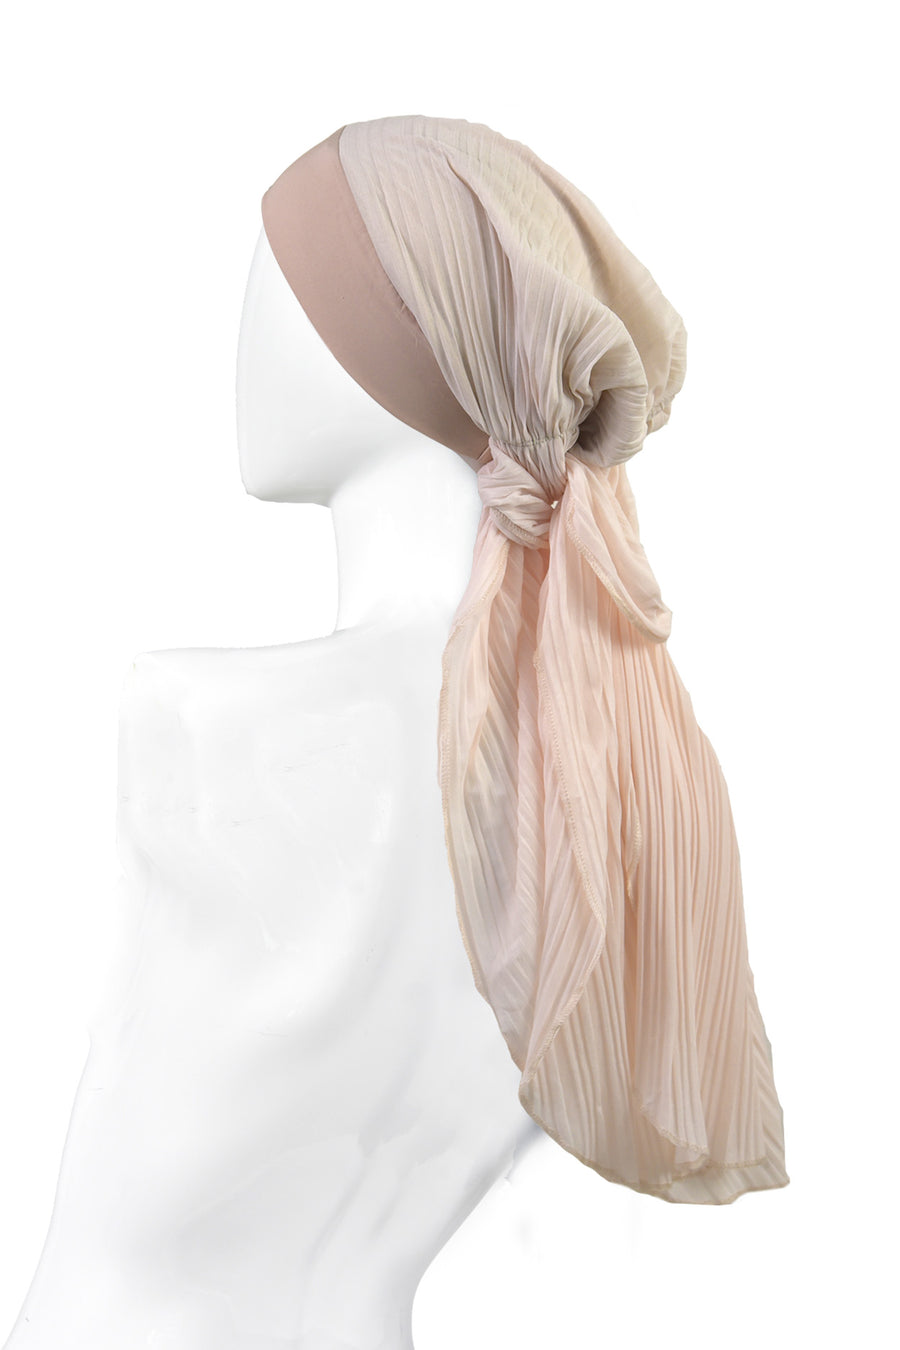 Pleated soft pink headwrap